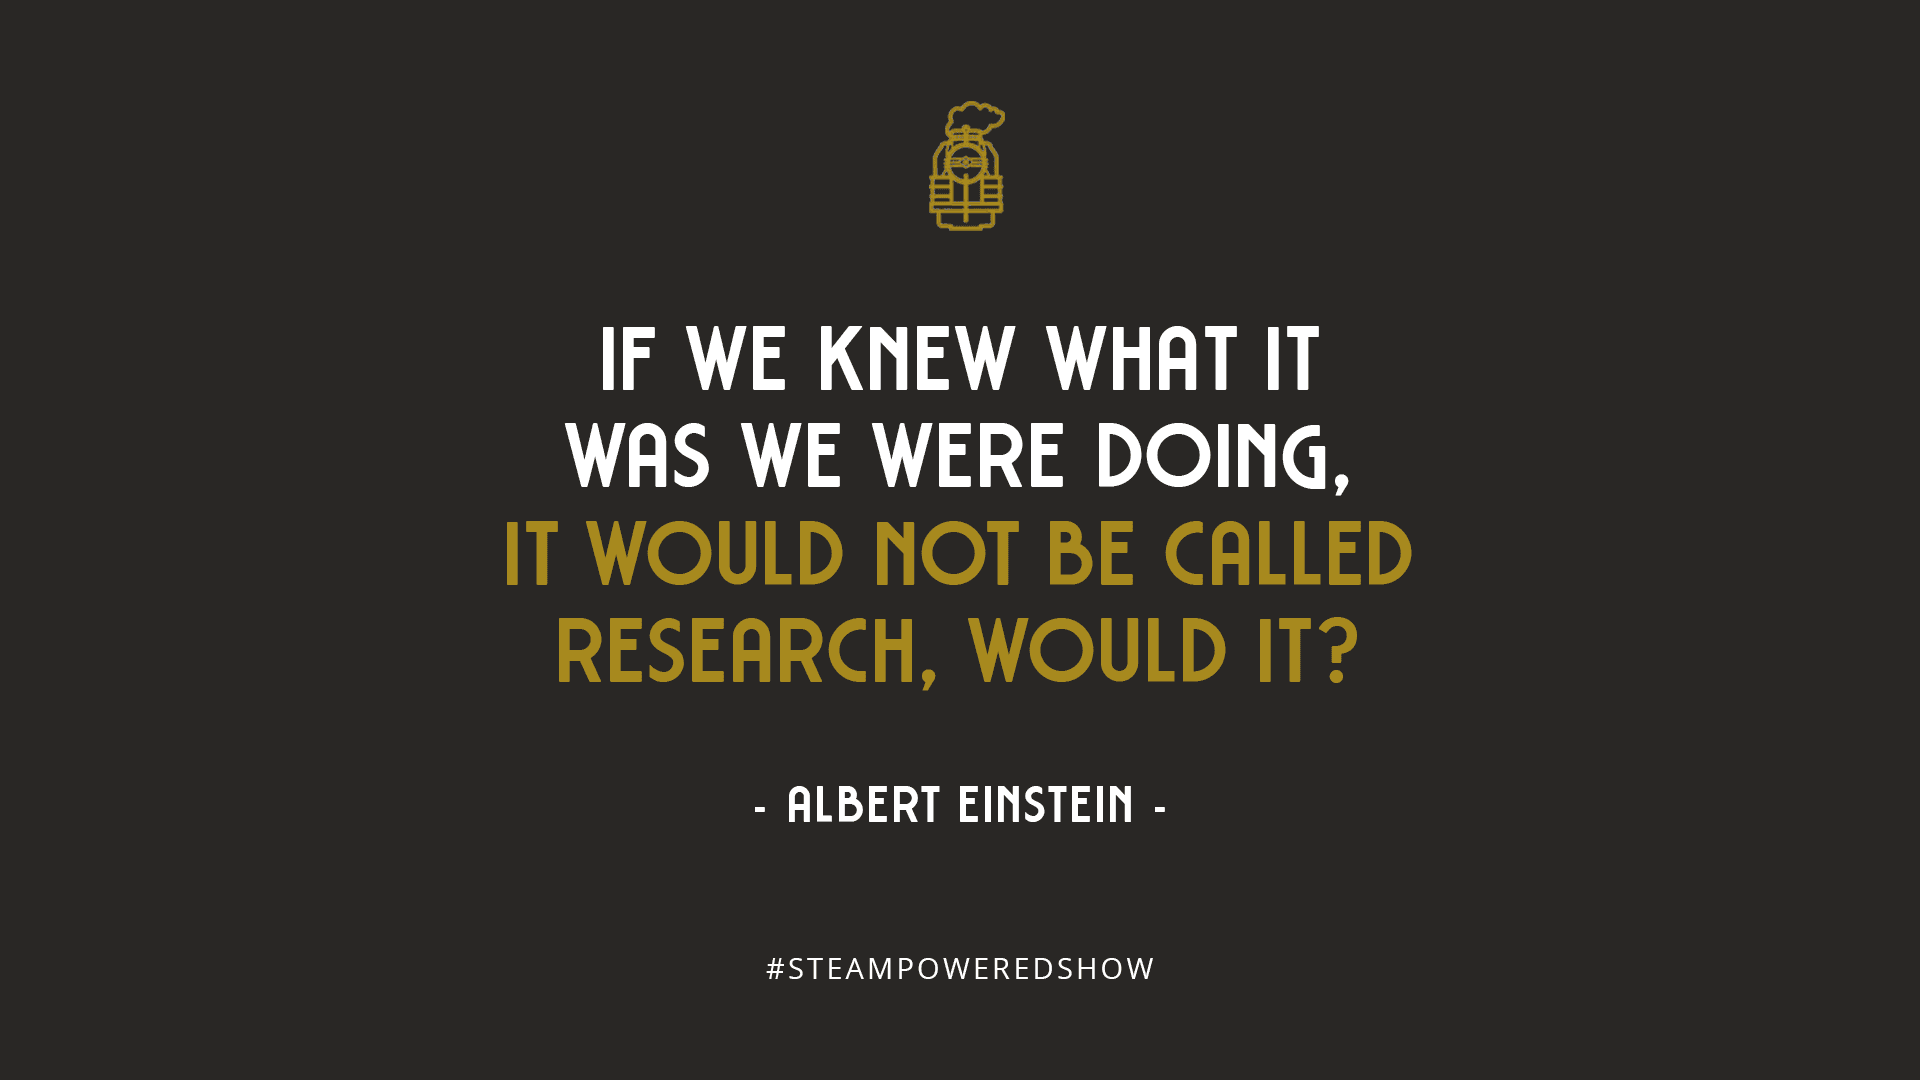 If we knew what it was we were doing, it would not be called research, would it? – Albert Einstein[1]